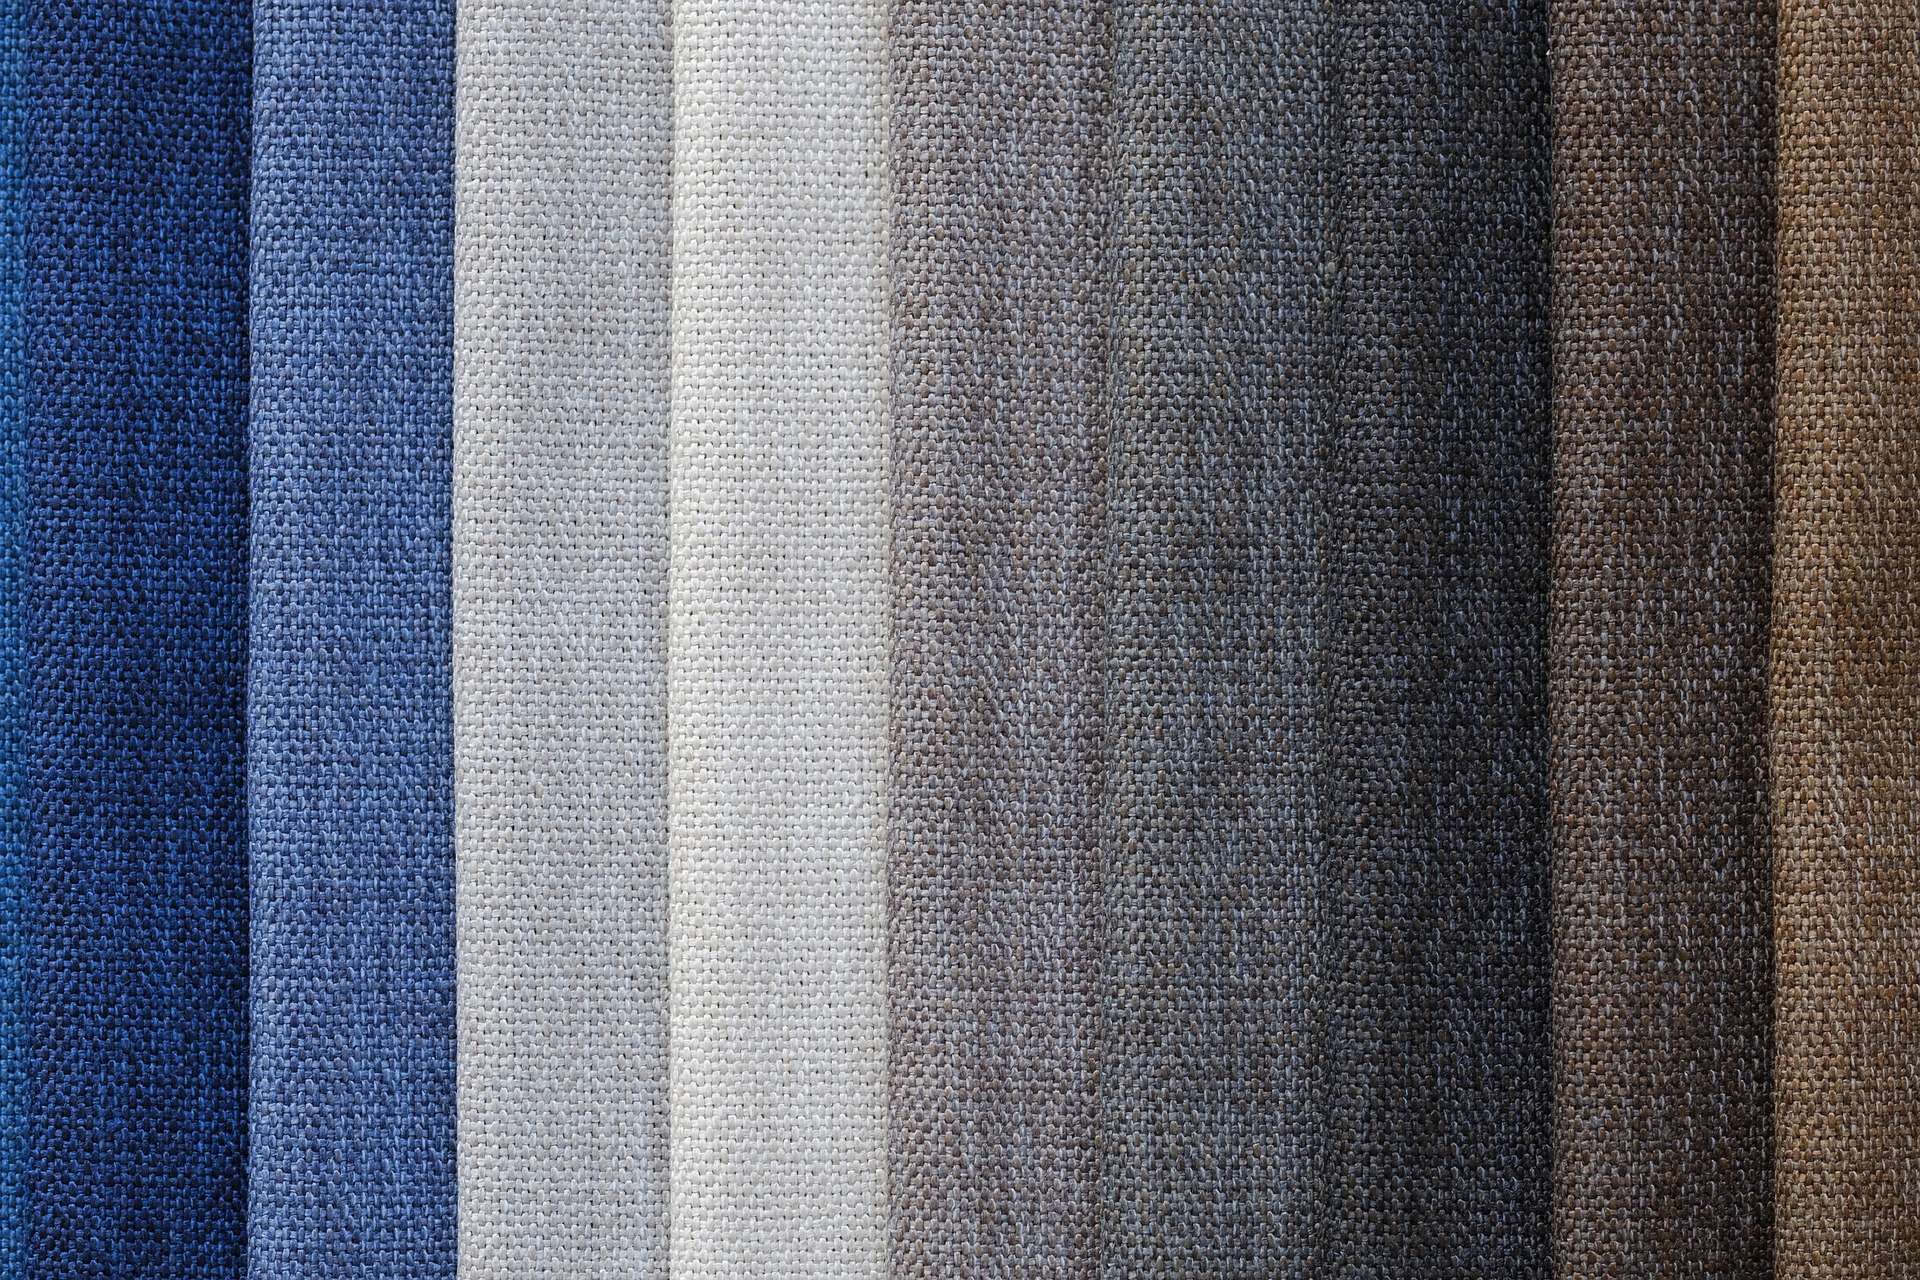 Several different fabrics layered over each other varying in colour.